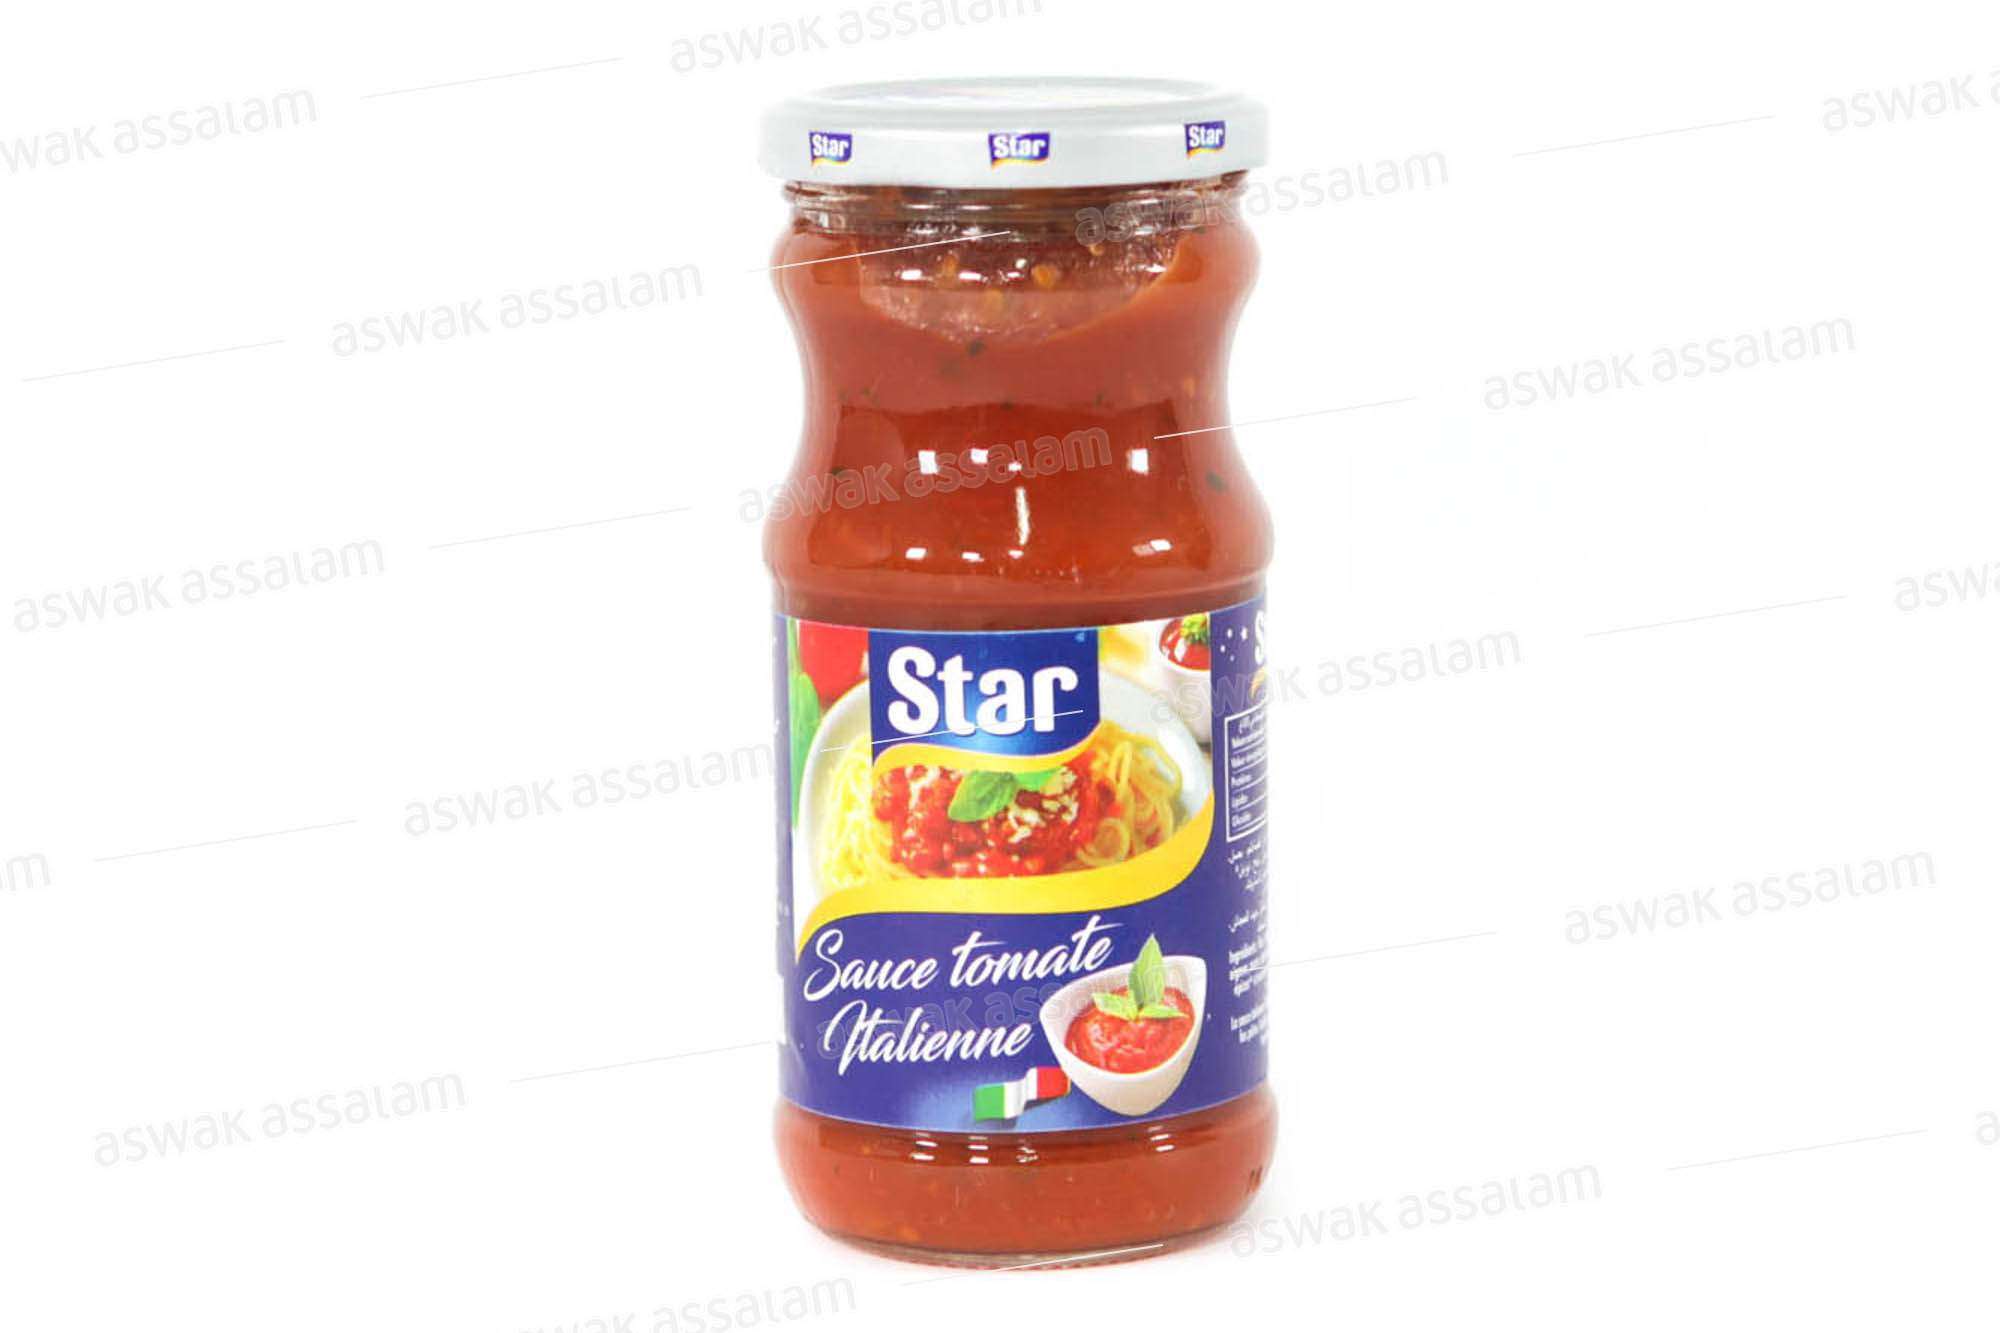 SAUCE TOMATE ITALIENNE 37CL STAR